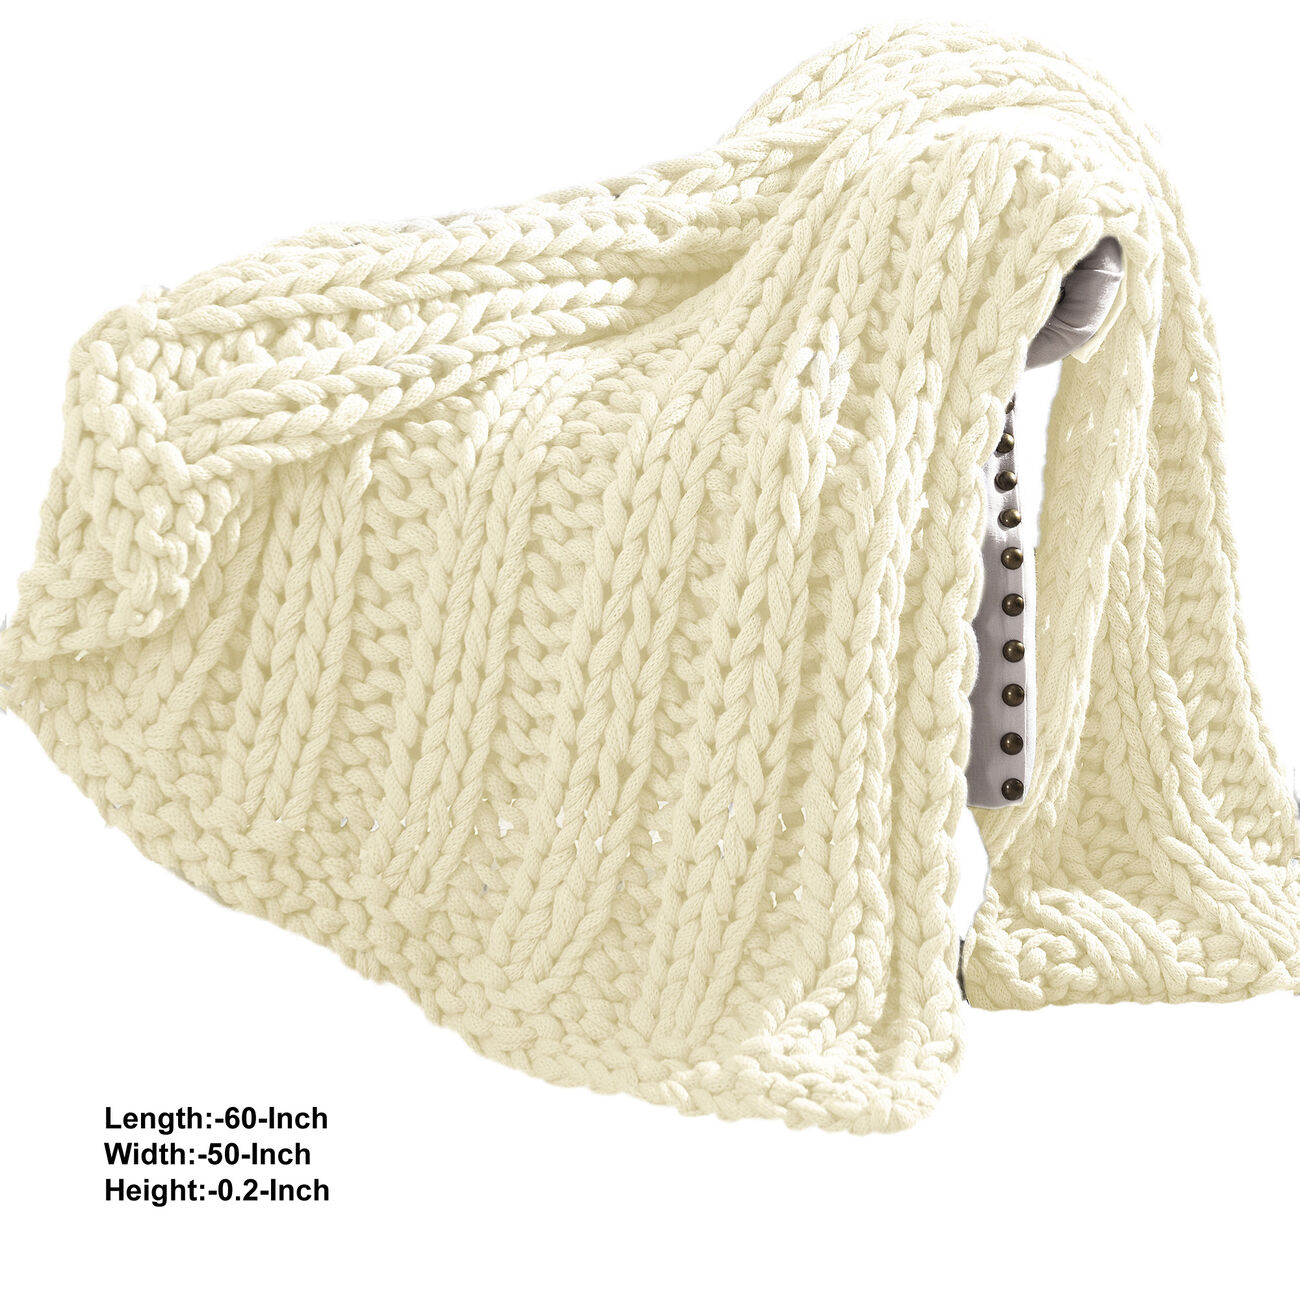 Dreux Acrylic Cable Knitted Chunky Throw The Urban Port, Cream